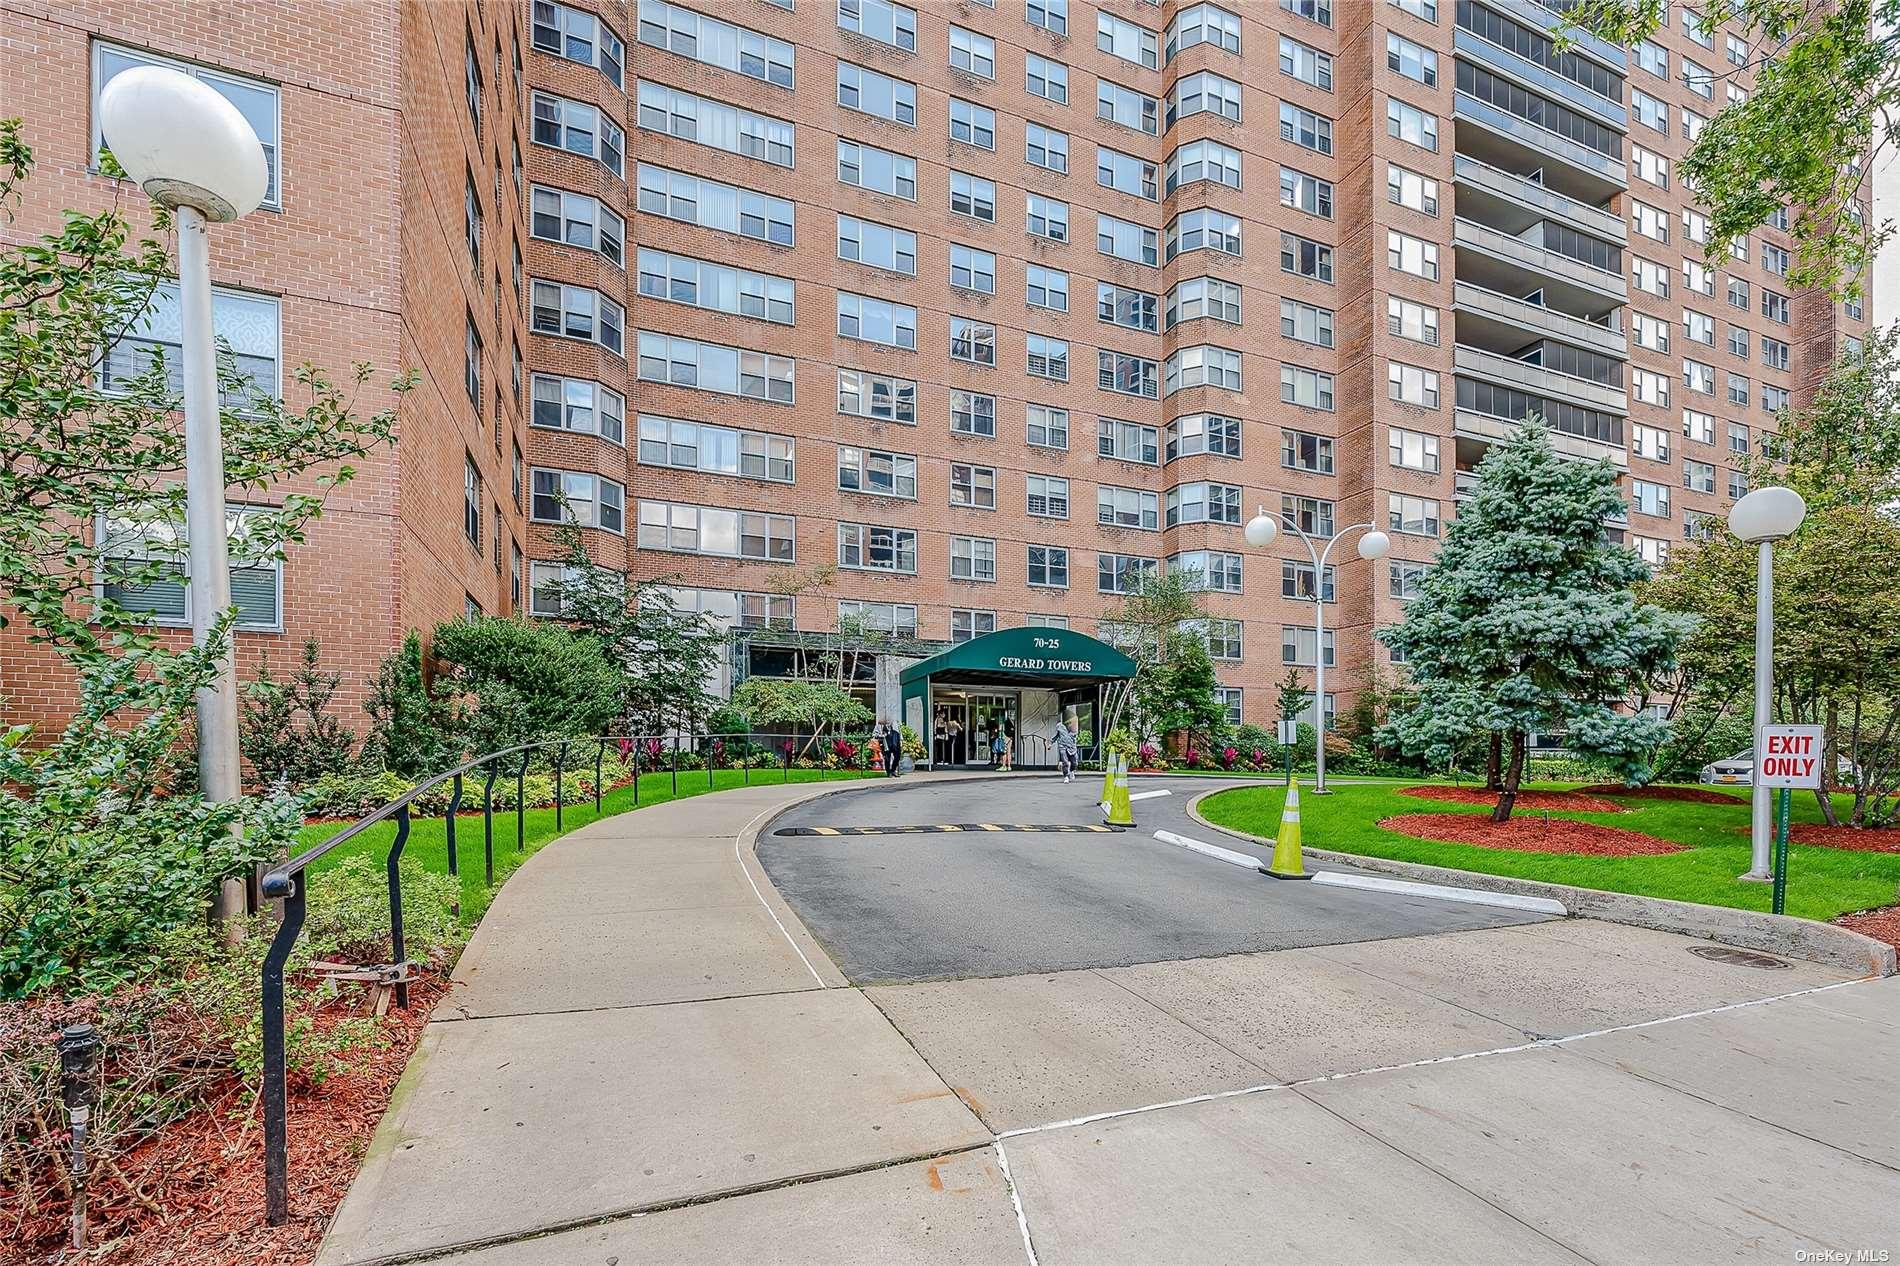 70-25 Yellowstone Boulevard #19B in Queens, Forest Hills, NY 11375